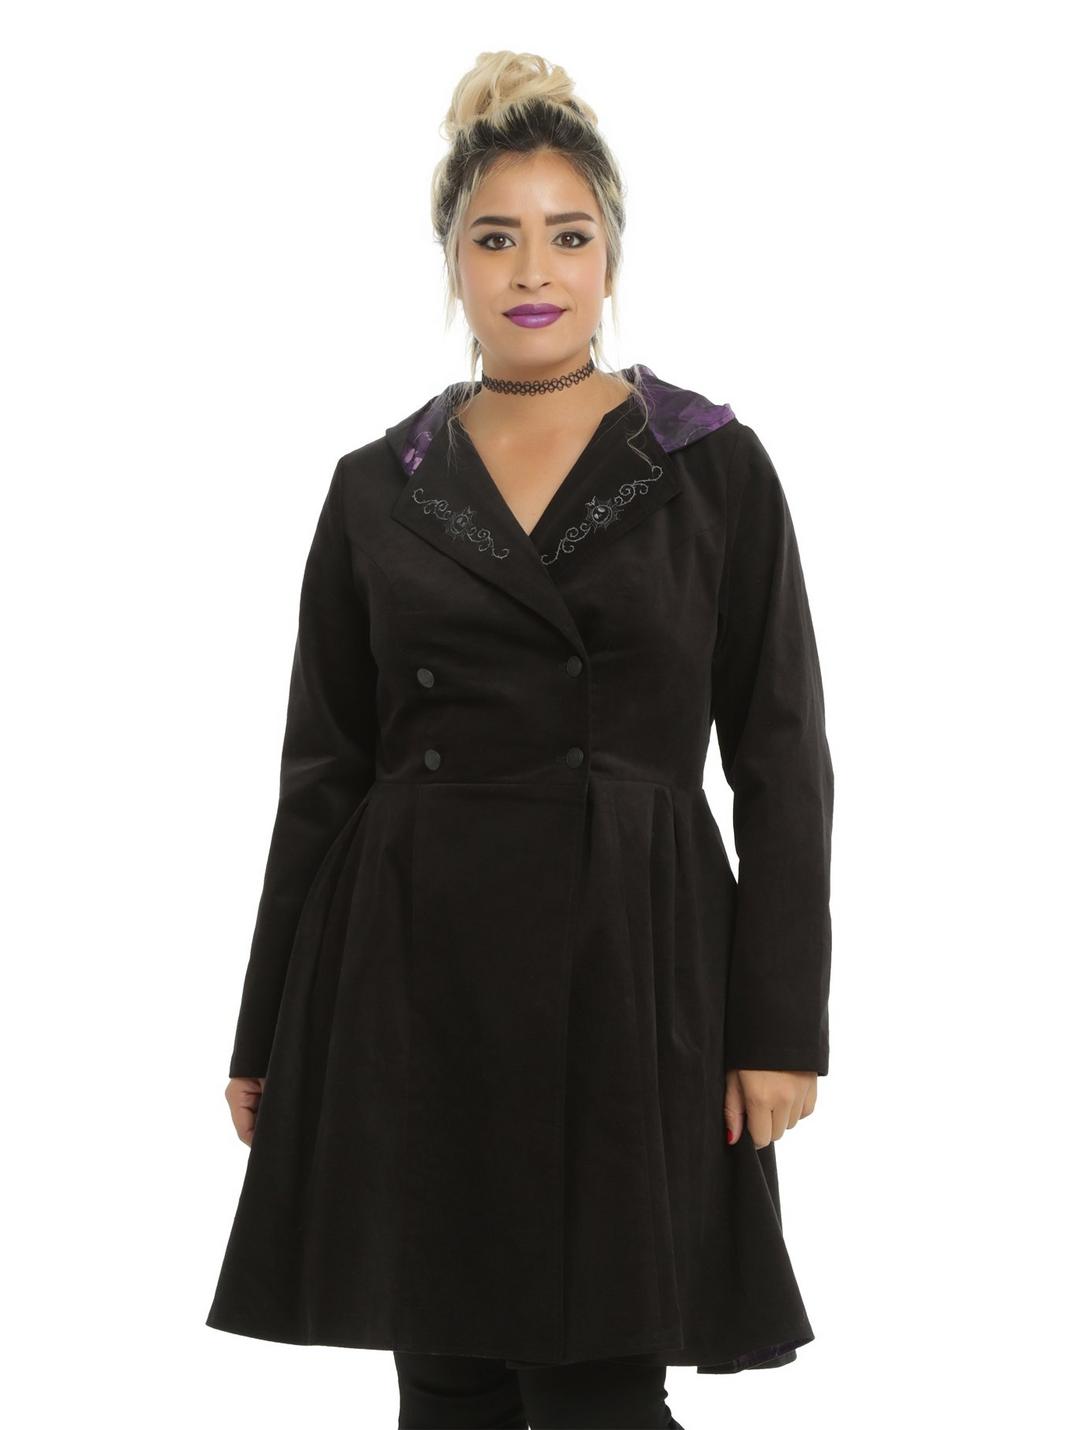 The Nightmare Before Christmas Girls Trench Coat Plus Size, BLACK, hi-res